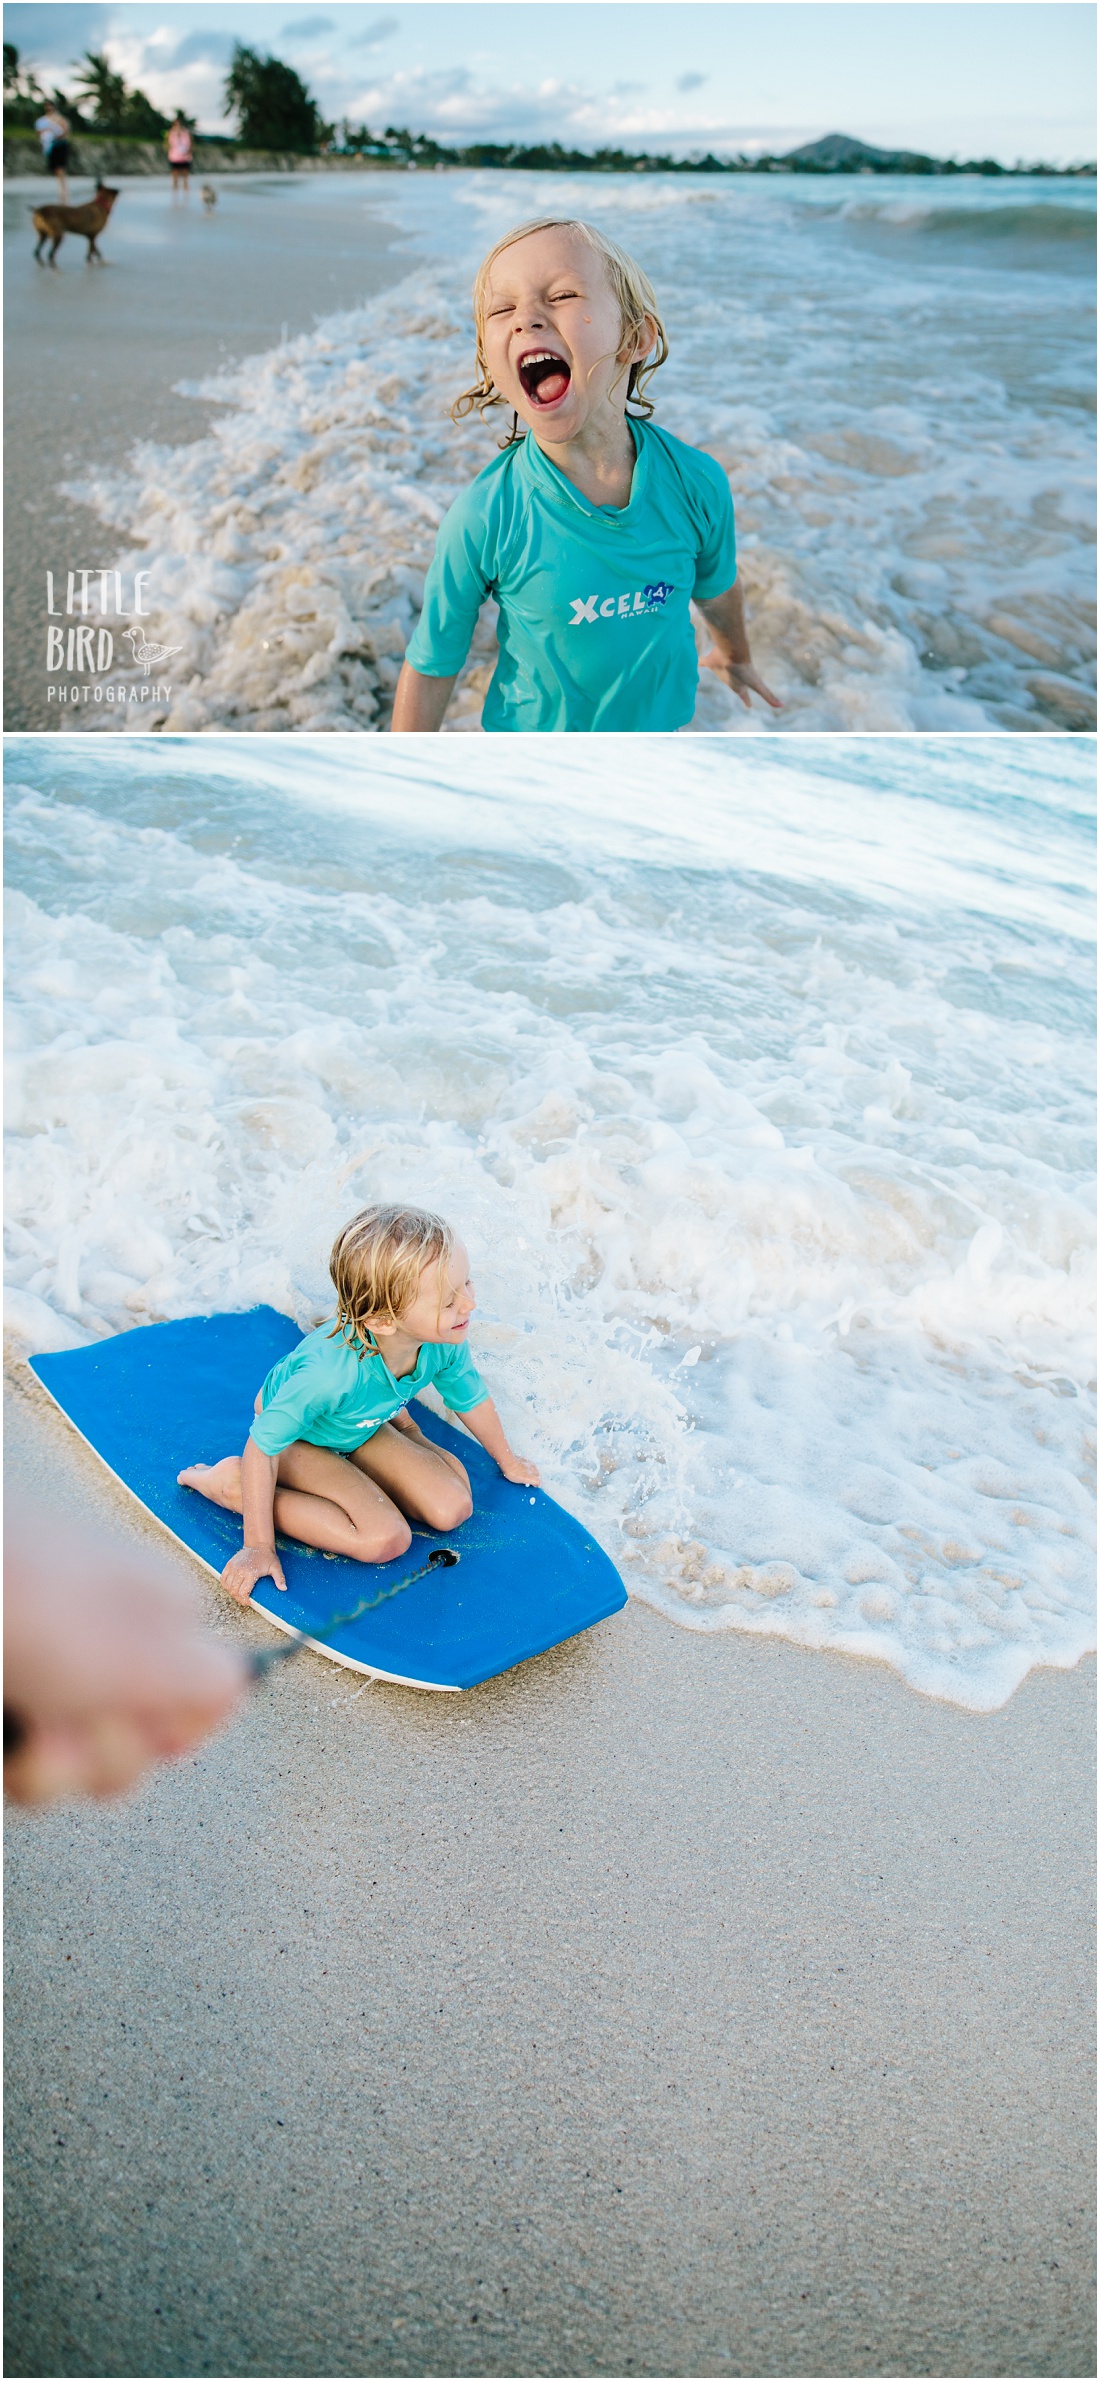 04-kids-playing-in-surf-at-kailua-beach